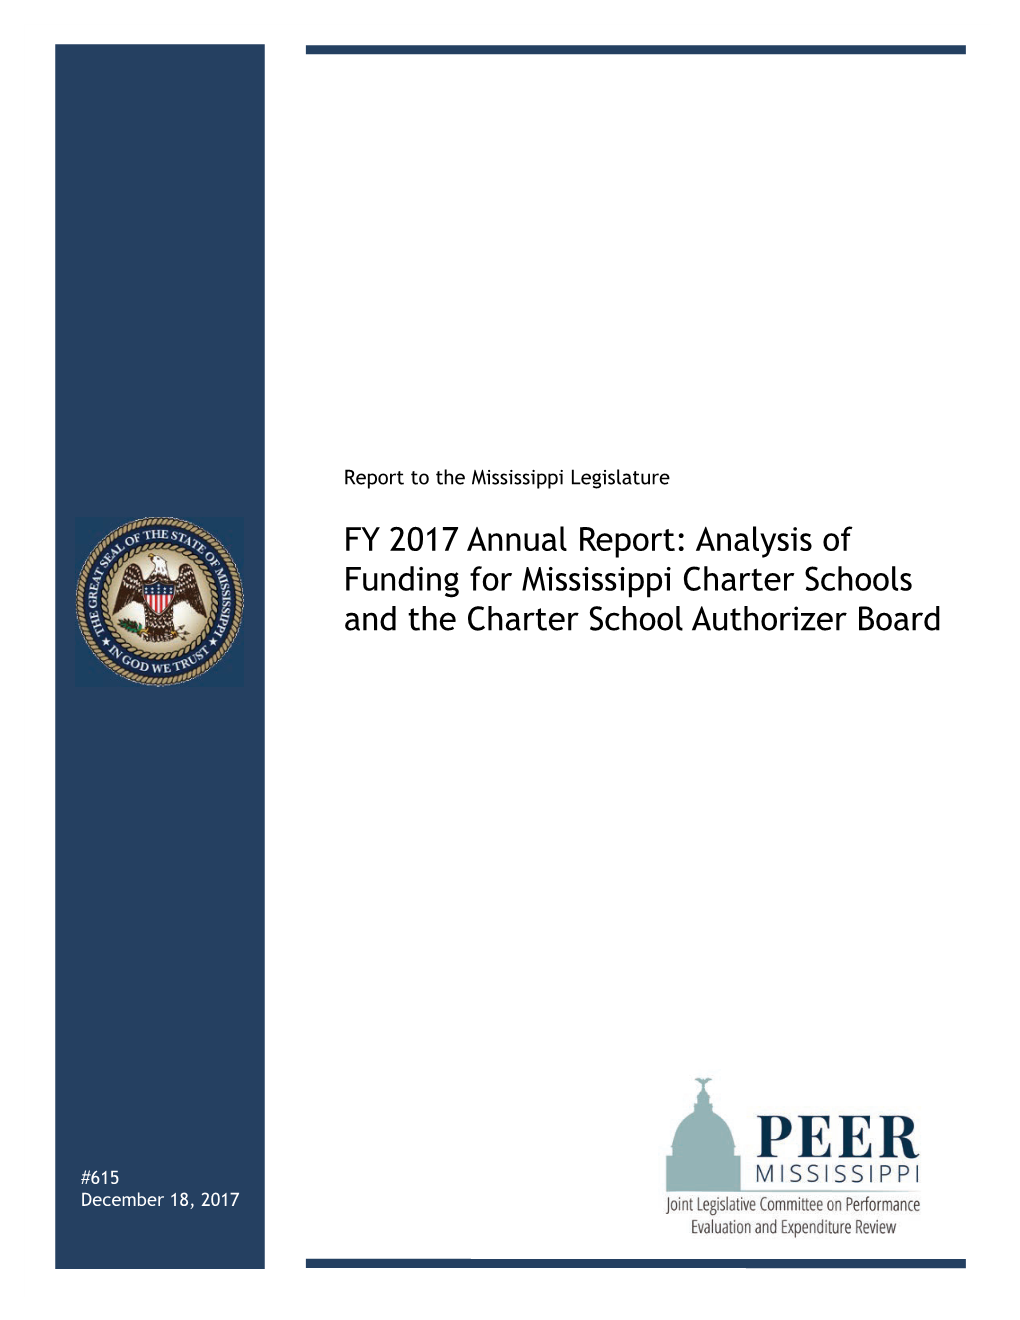 Analysis of Funding for Mississippi Charter Schools and the Charter School Authorizer Board